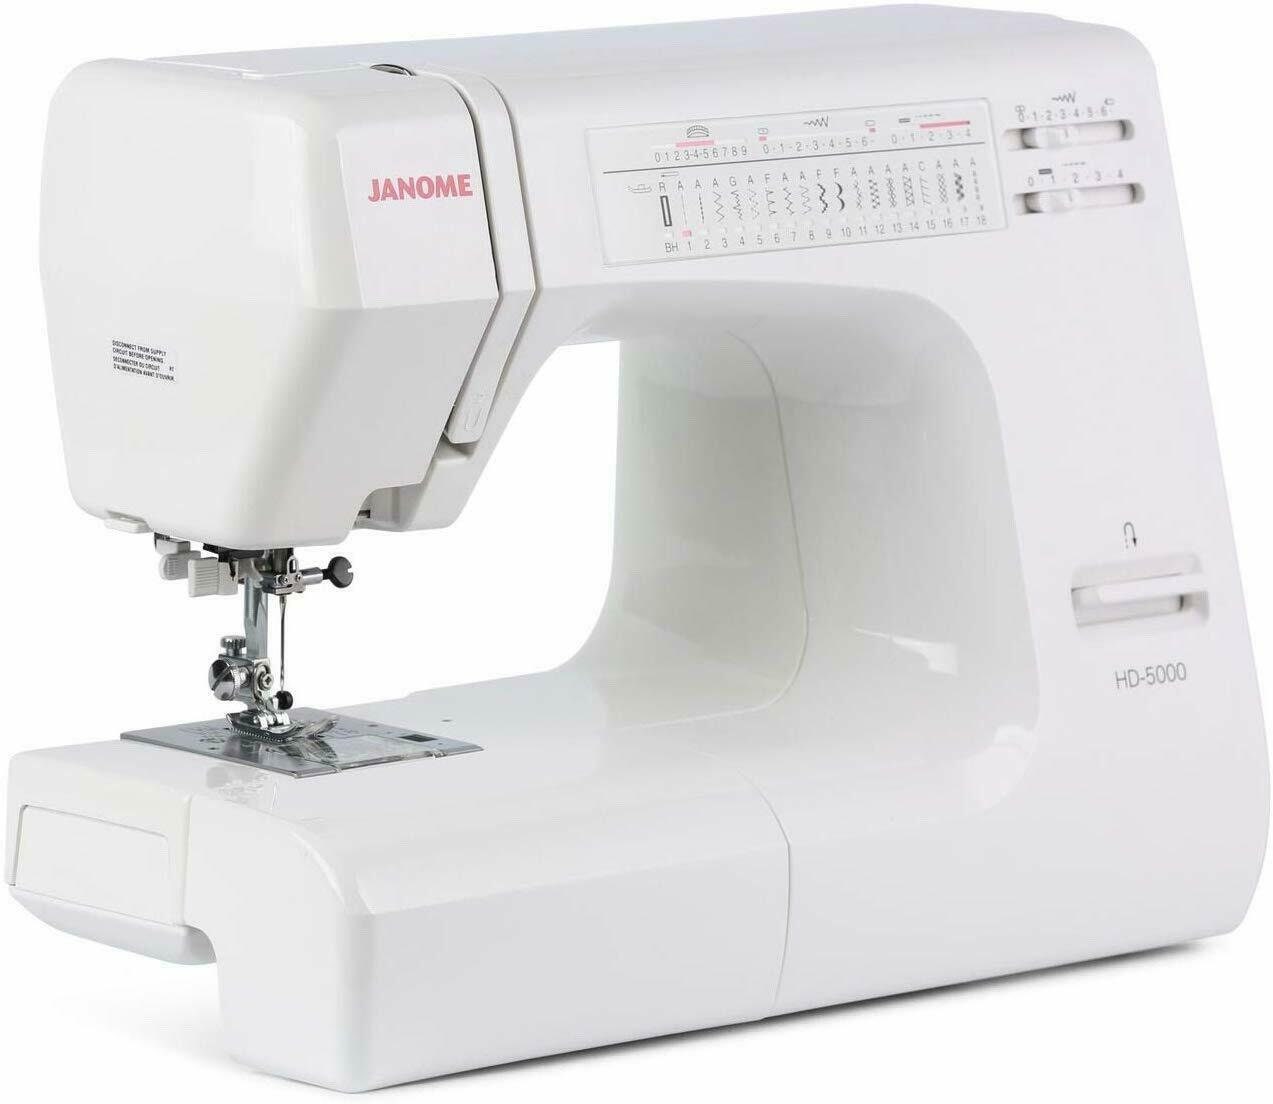 Janome HD-5000 Black Edition Sewing Machine with Bonus Package